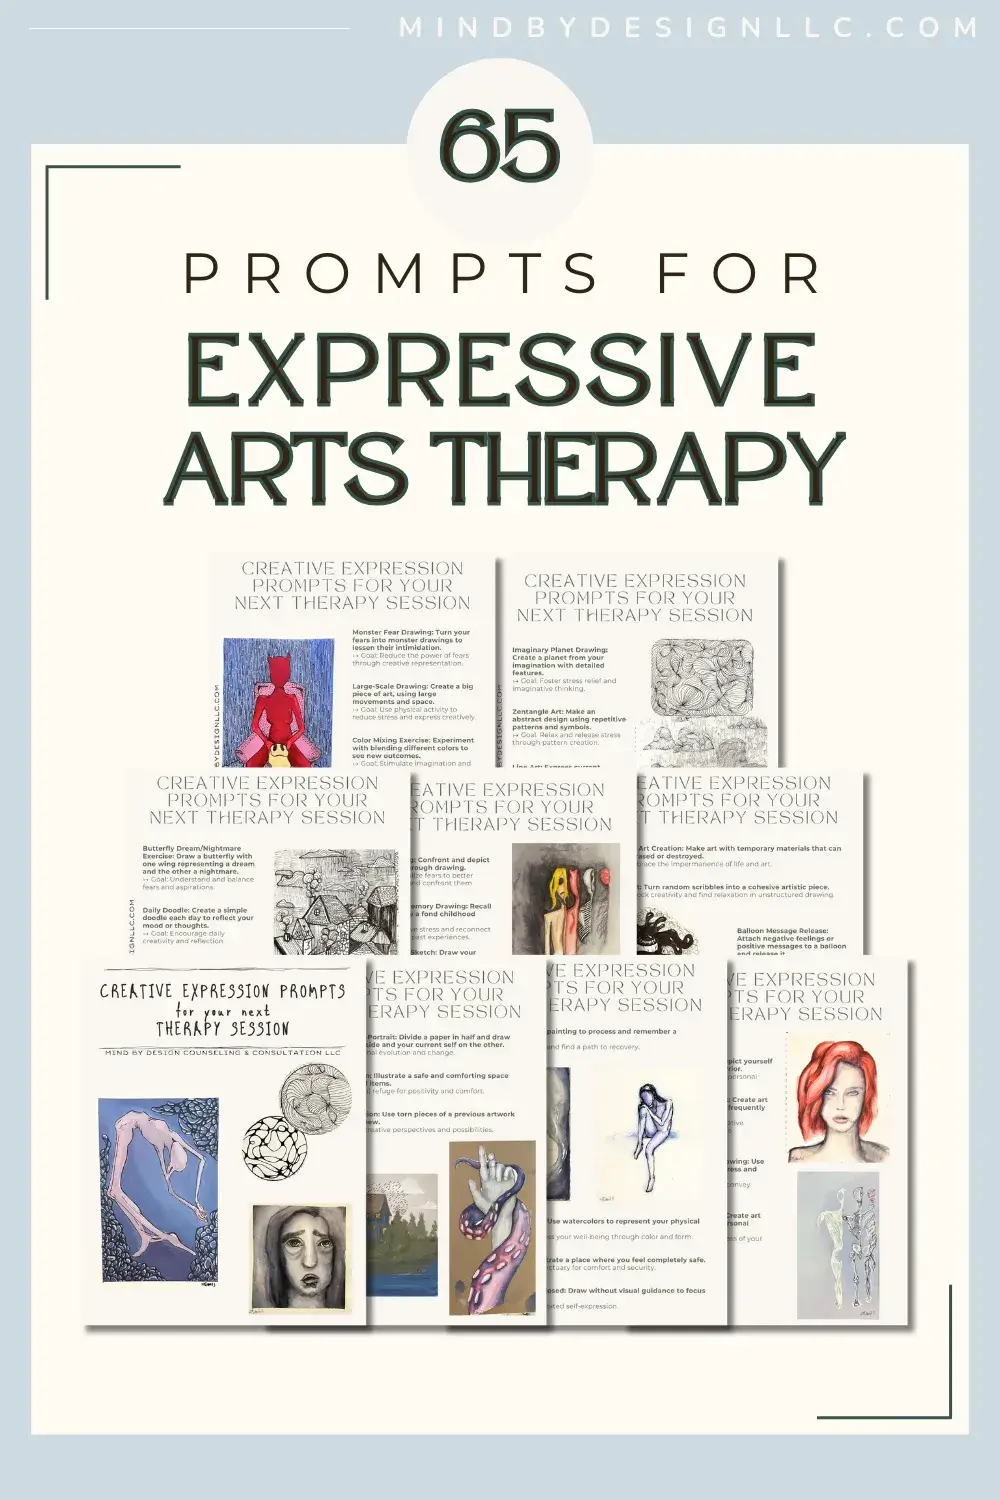 65 Prompts for Expressive Arts Therapy